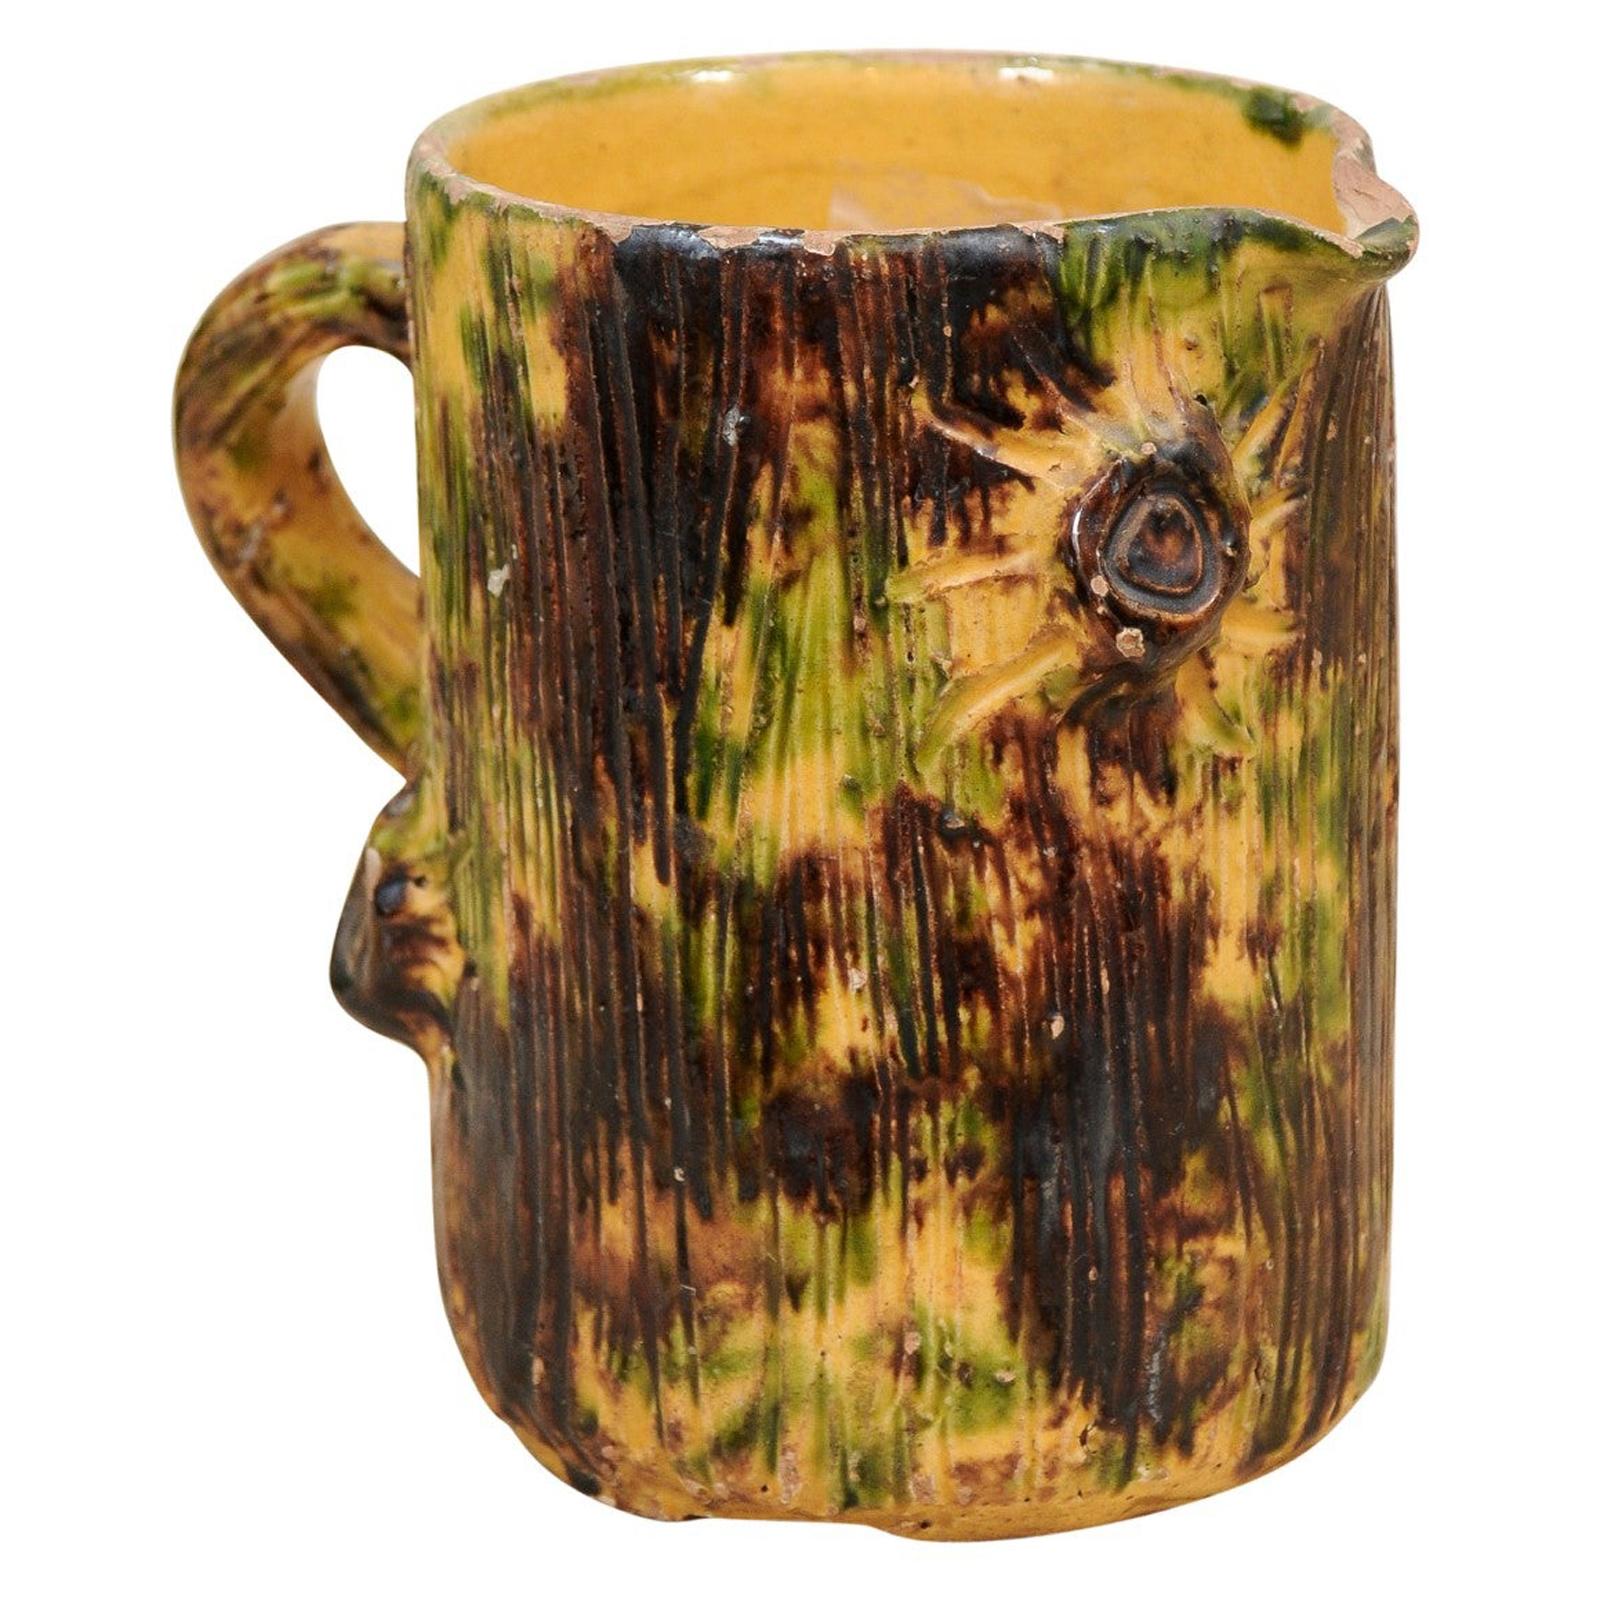 French Brown Glazed Pottery Pitcher with Yellow and Green Textured Accents